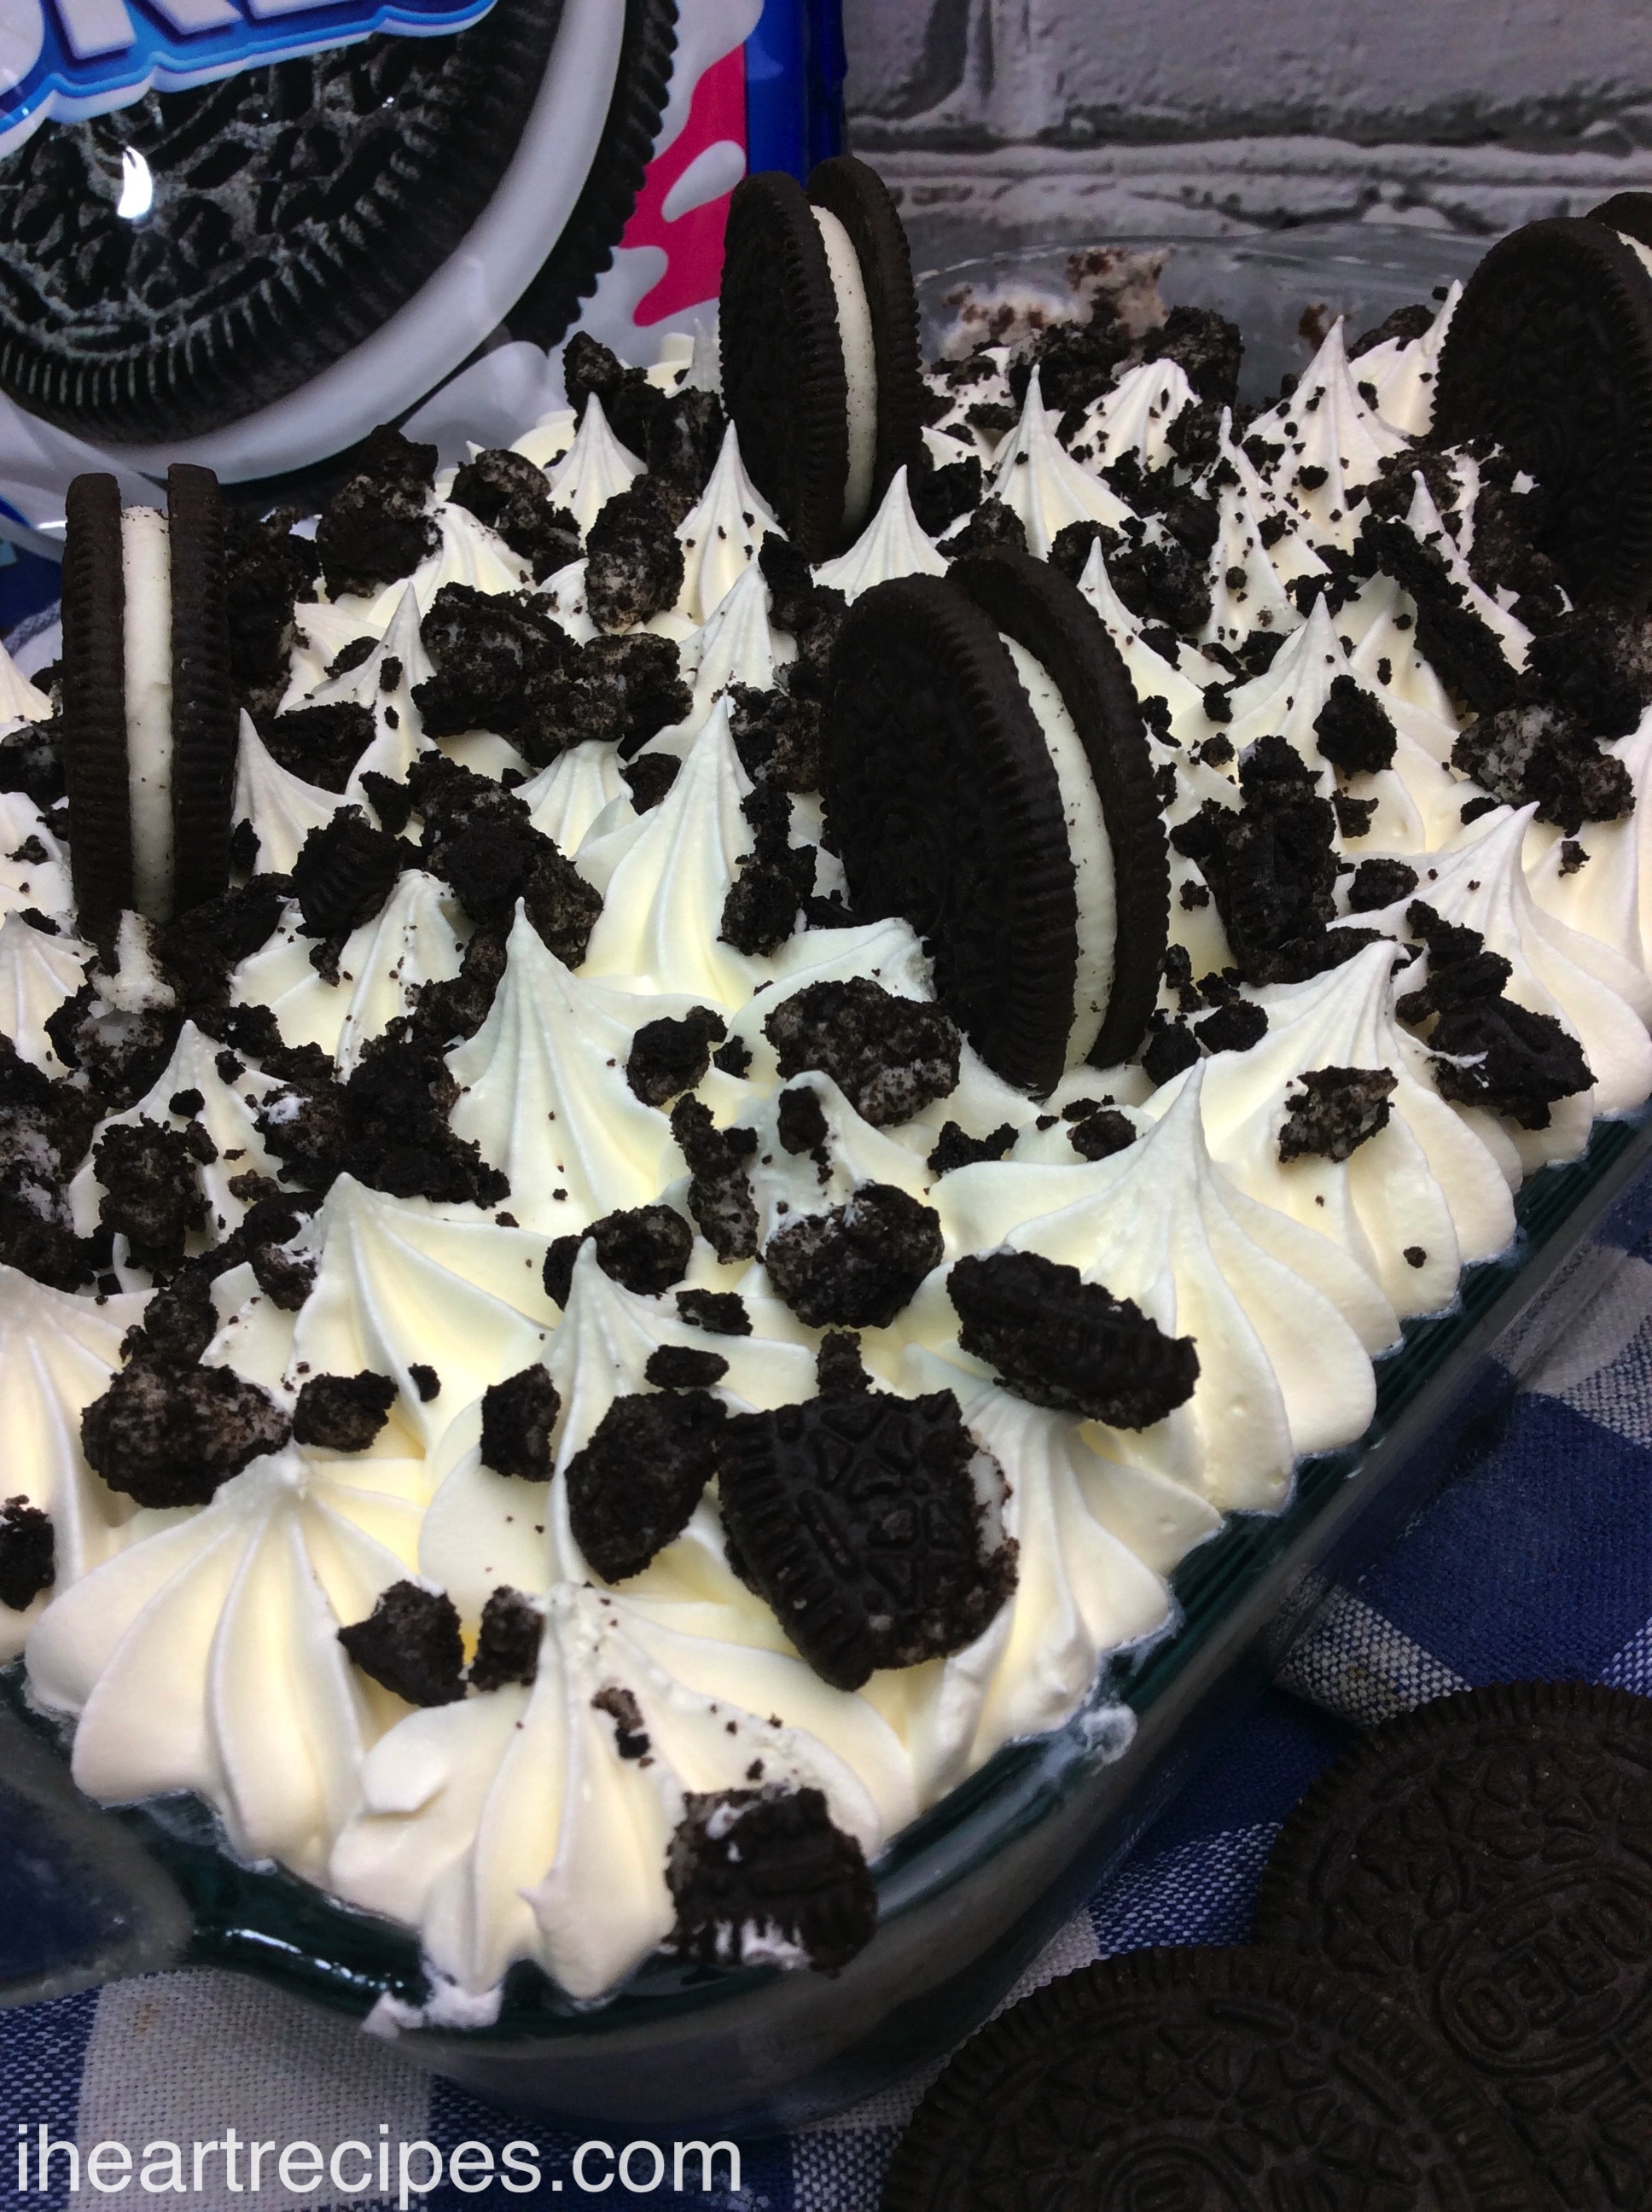 Creamy and fluffy homemade Oreo ice box cake served in a simple glass baking dish.